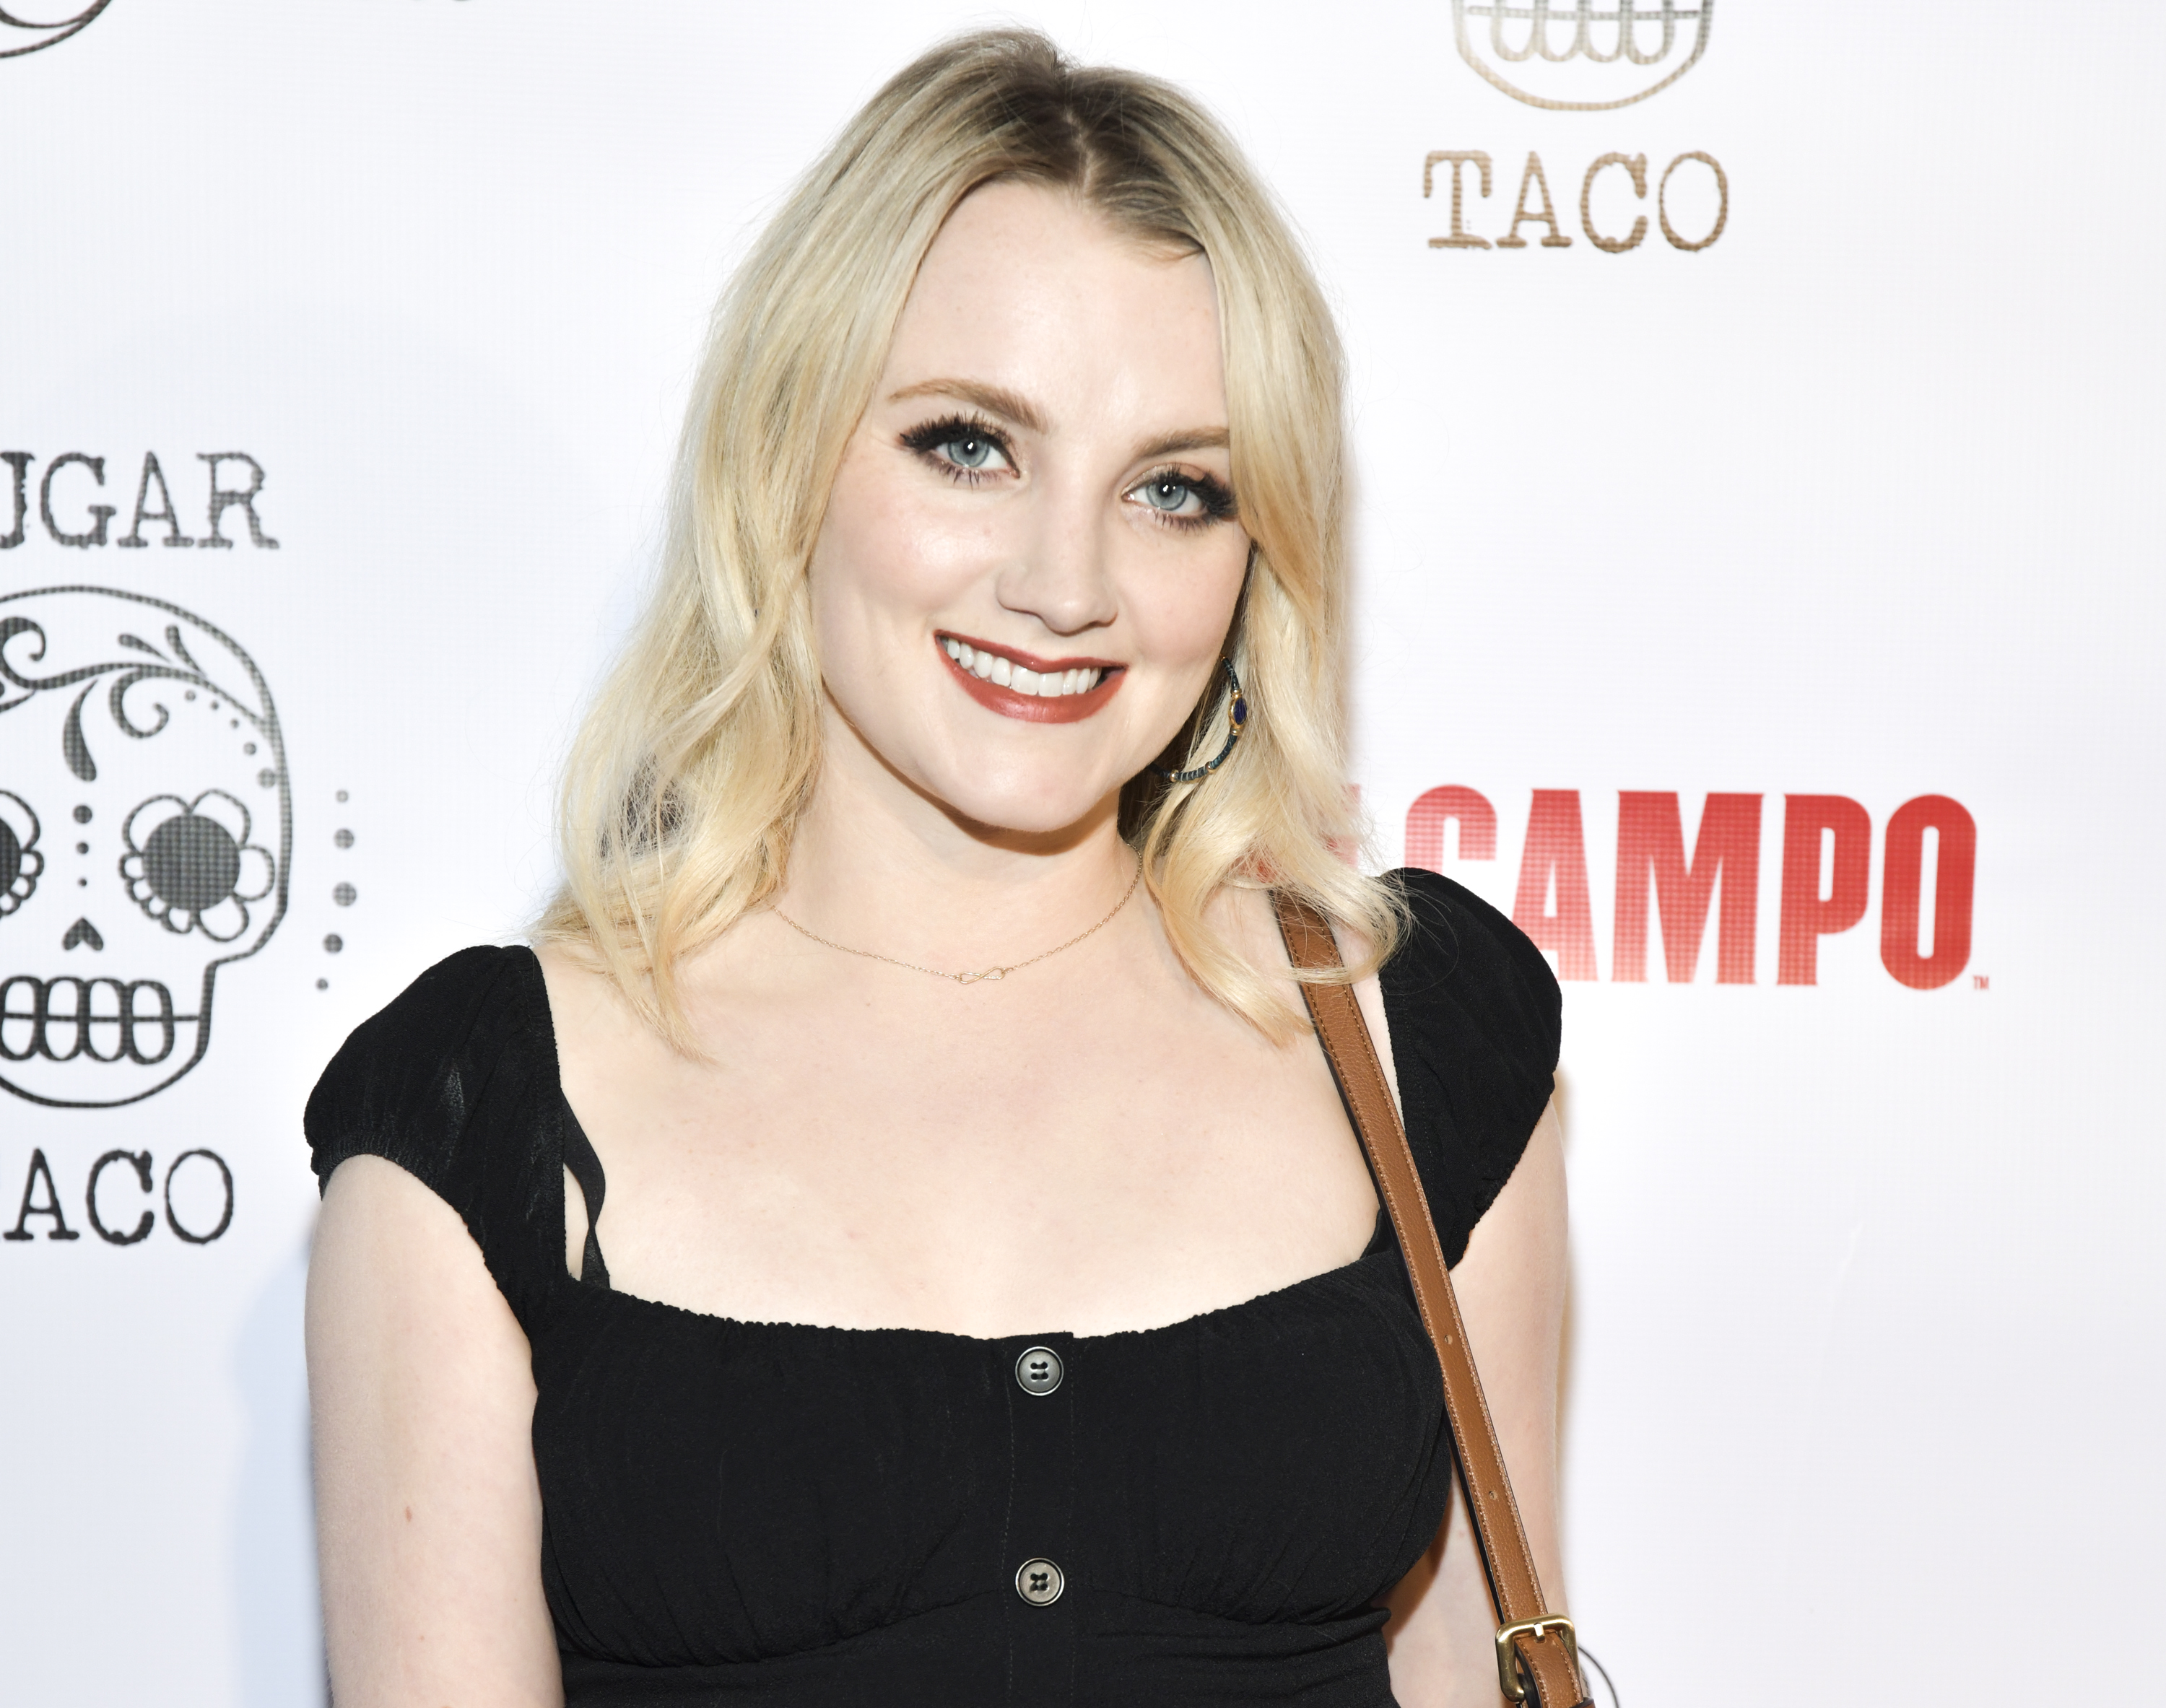 Evanna Lynch attends the launch of Sugar Taco in Los Angeles in 2019